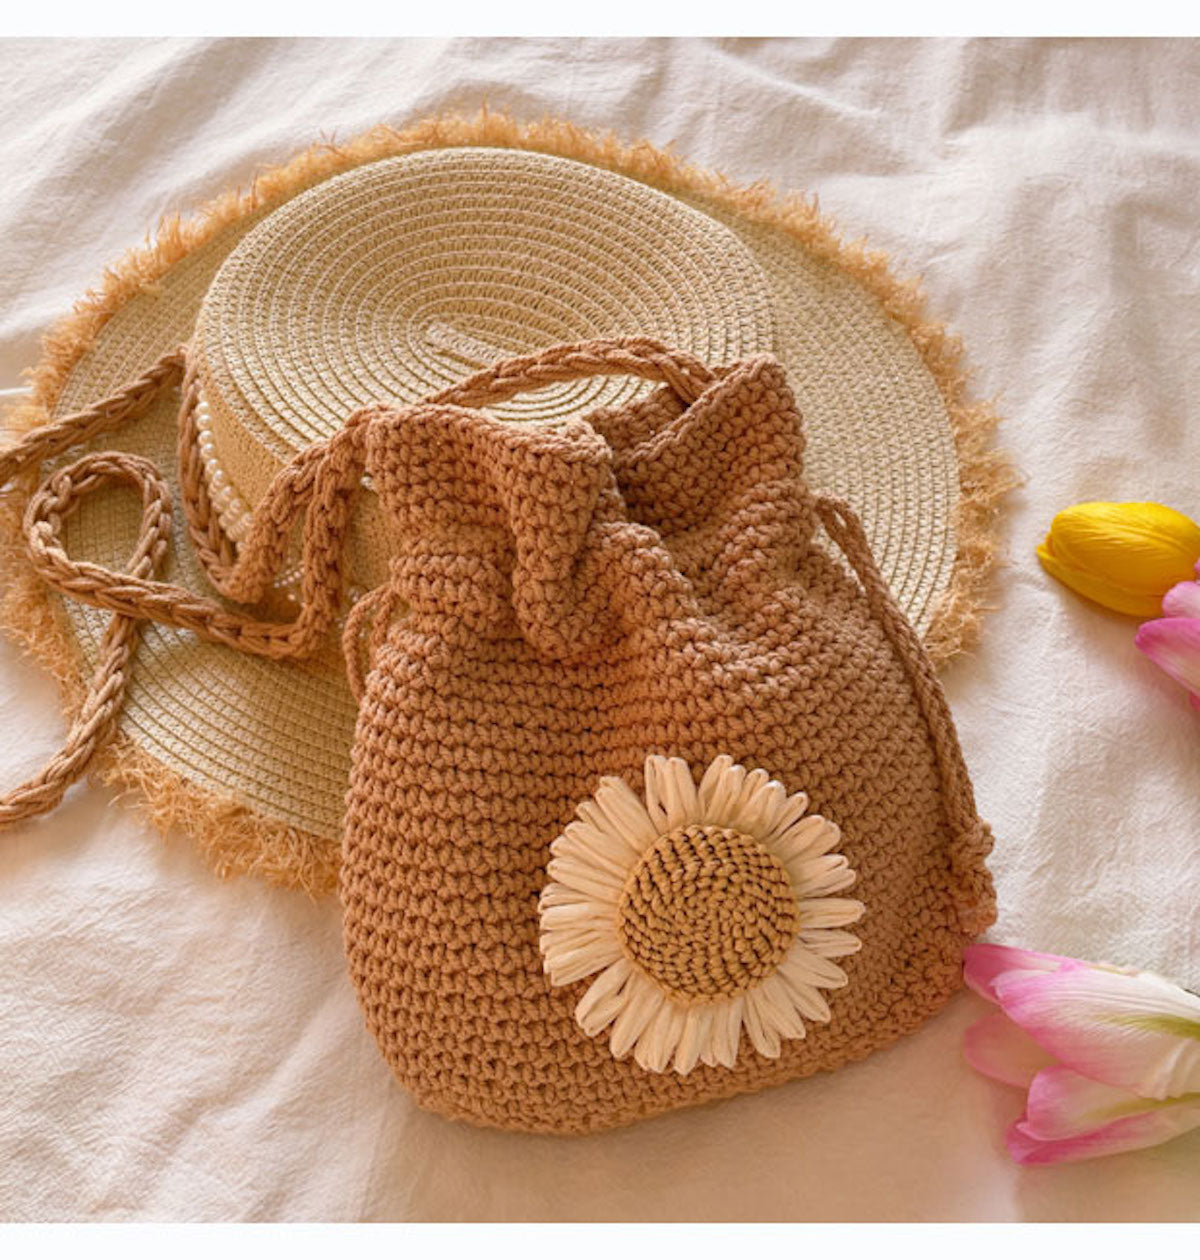 Lion Brand Yarn - Stashing our spring and summer essentials in the Wild Flower  Bag. 24/7 Cotton® Yarn: http://ow.ly/qyaU50NpIVh 📸 madeby.jing (IG)  Pattern: Wild Flower Bag by cozymoondesigns (IG) | Facebook